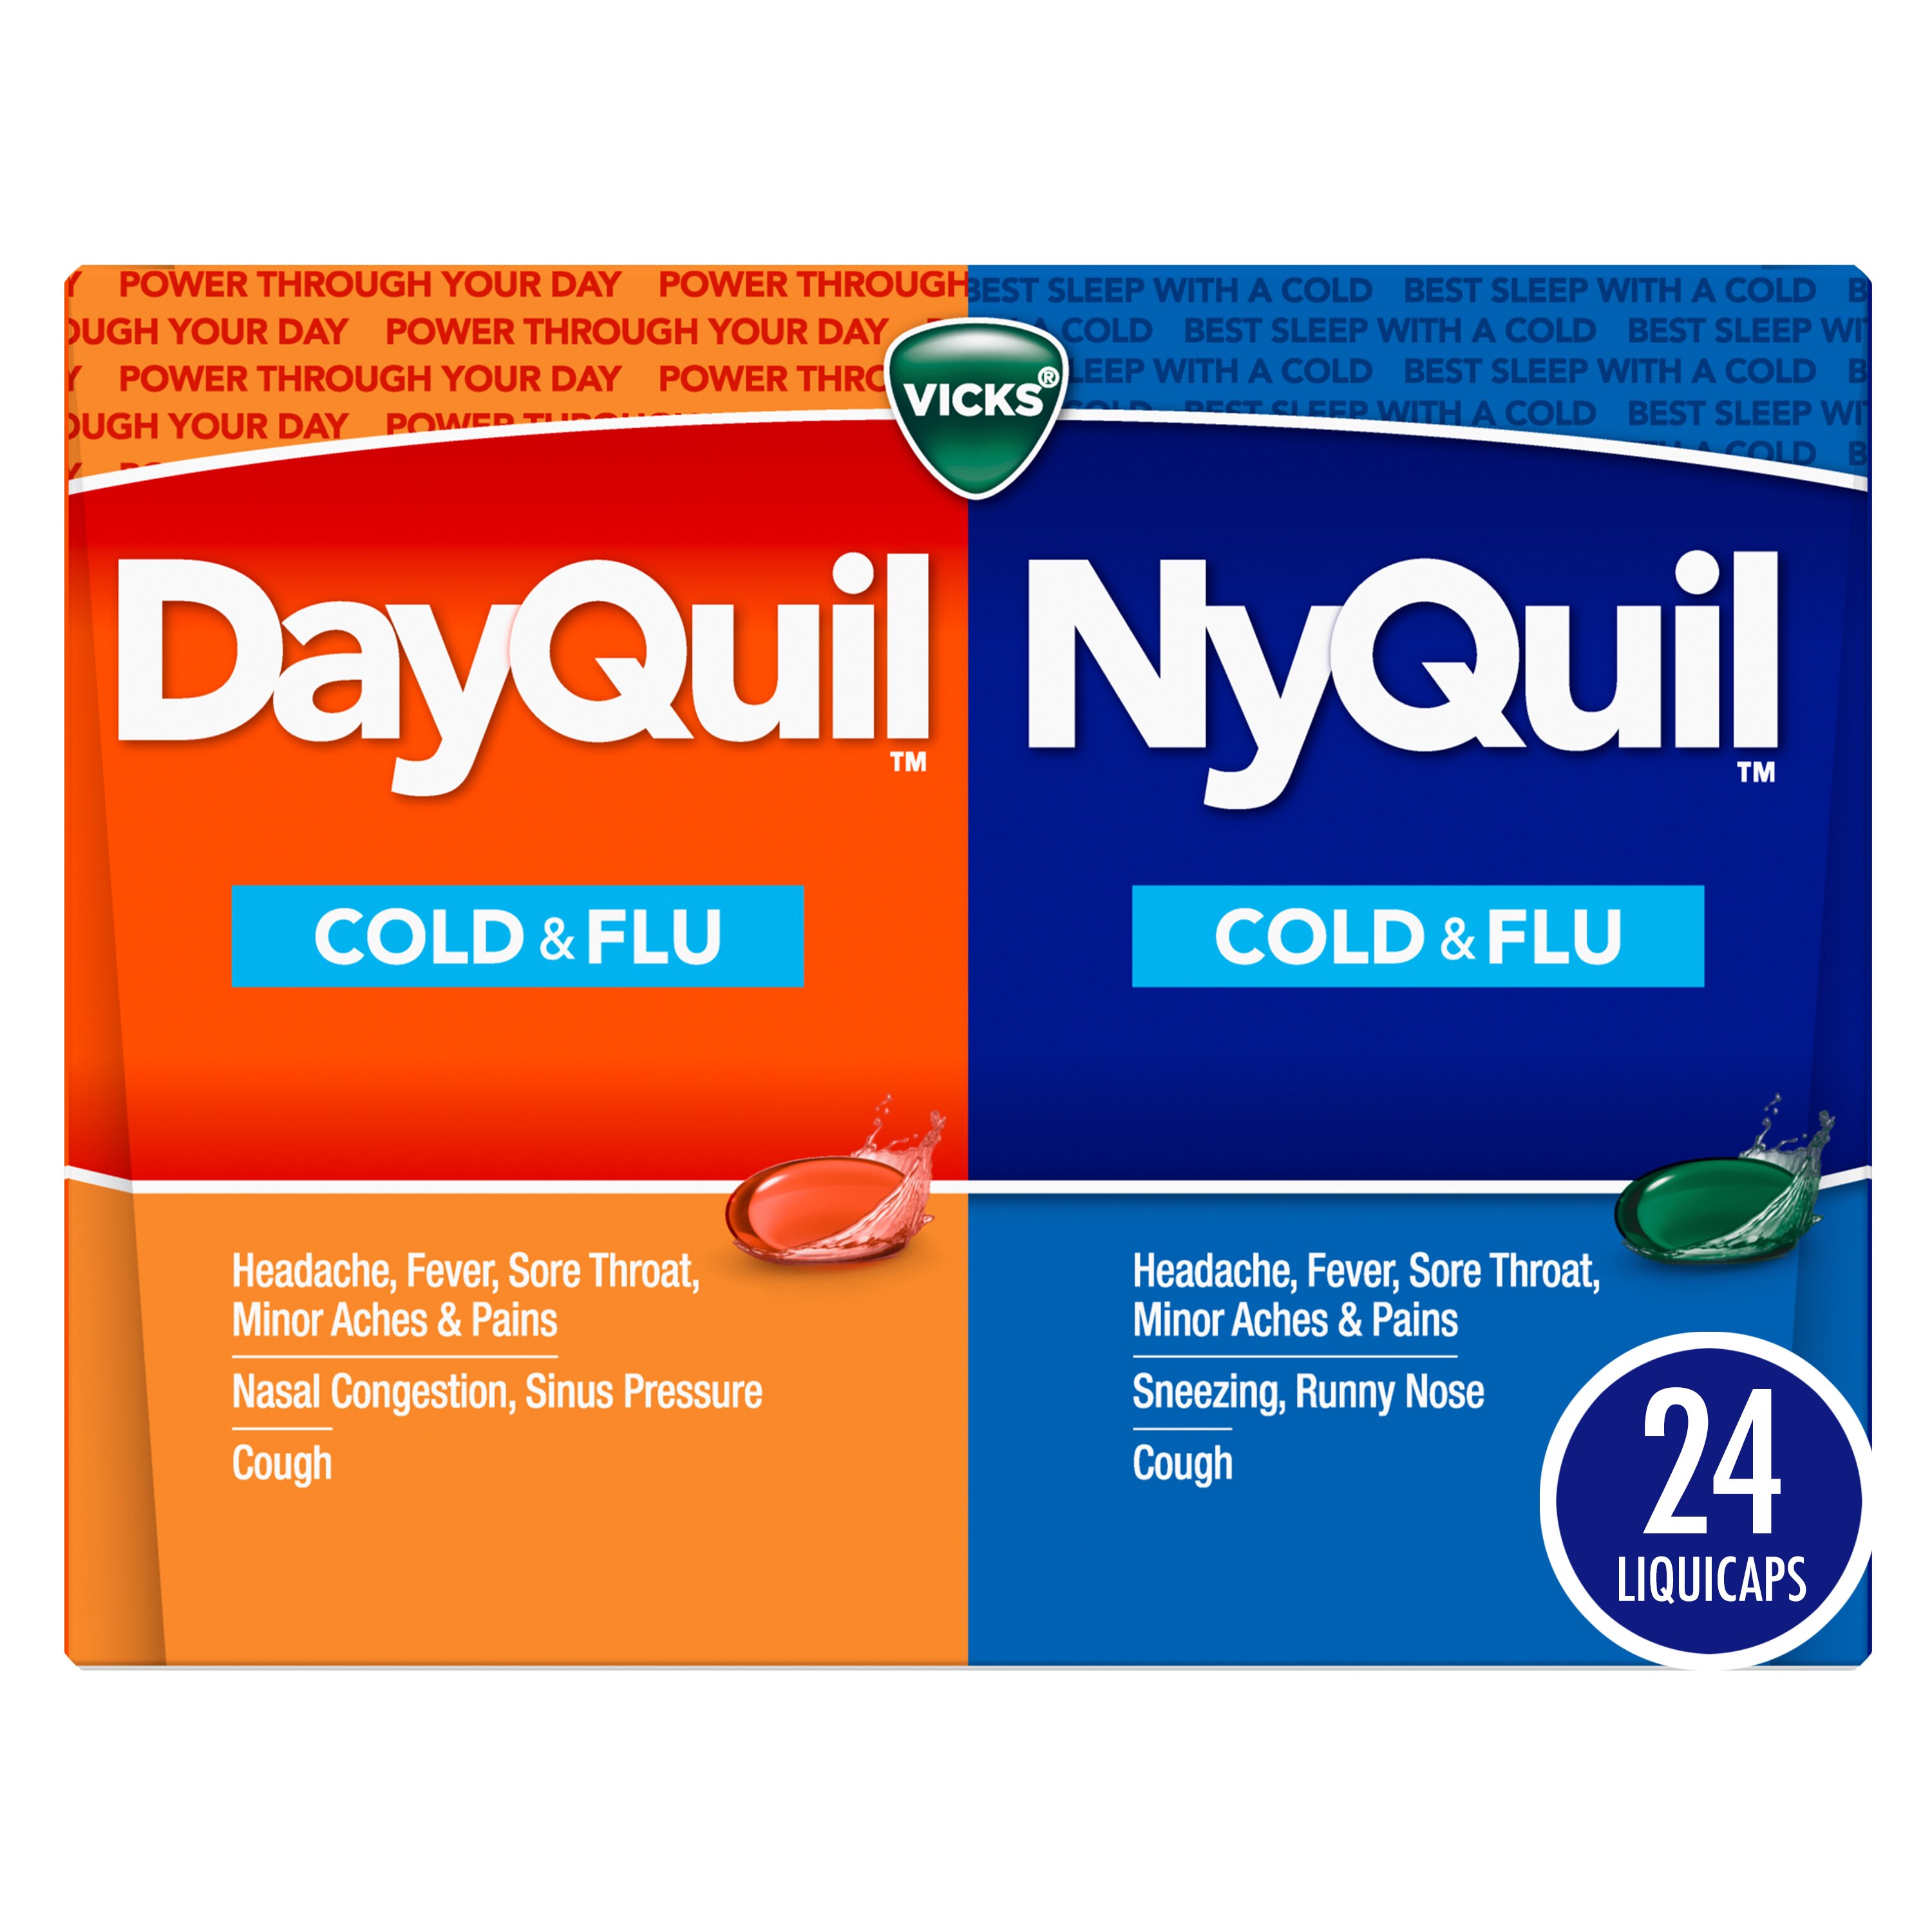 Vicks DayQuil and NyQuil Cold, Flu and Congestion Medicine, 24 LiquiCaps Convenience Pack, Relieves Cough, Sore Throat, Fever, Runny Nose, Daytime and Nighttime